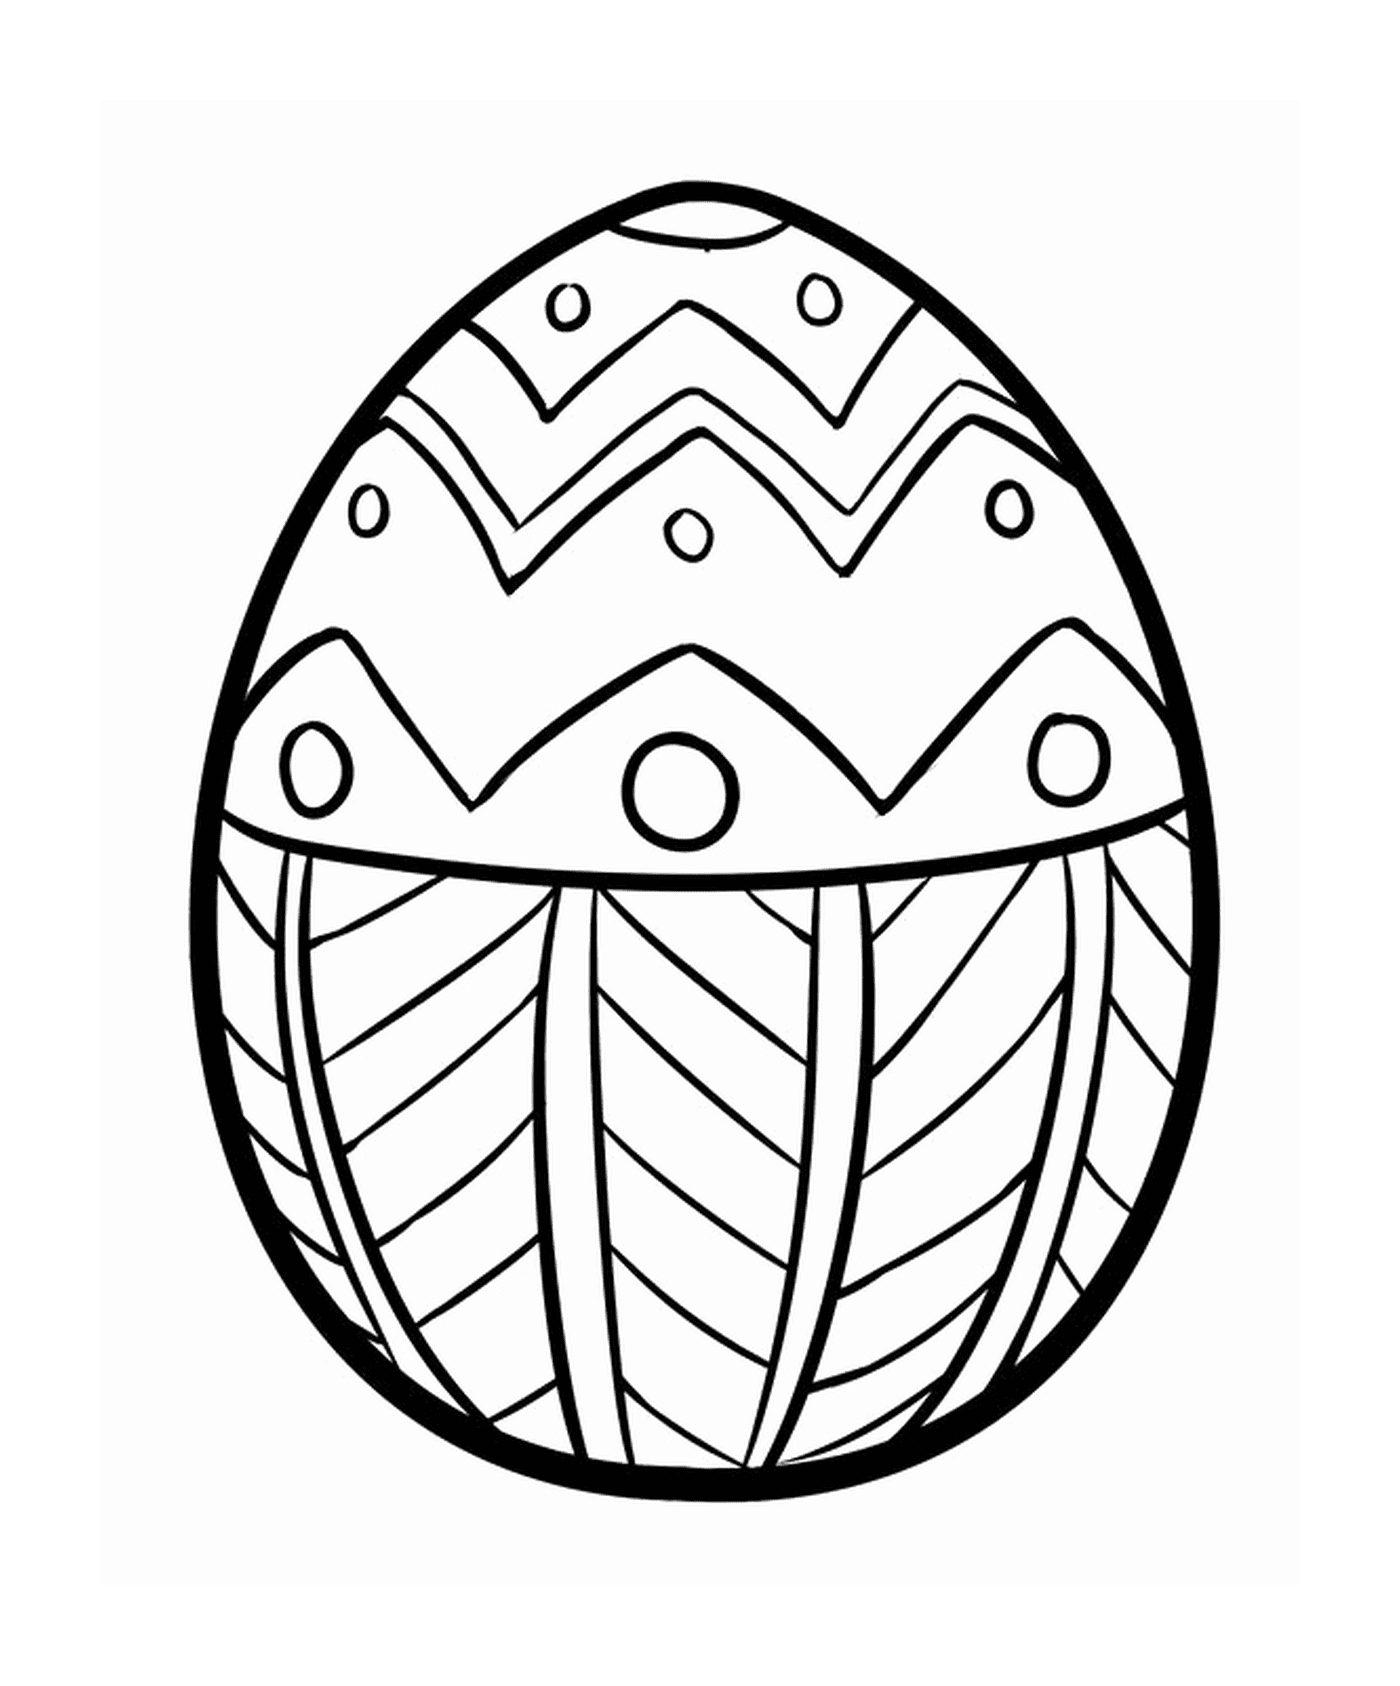  Easter egg with an intrigued design 